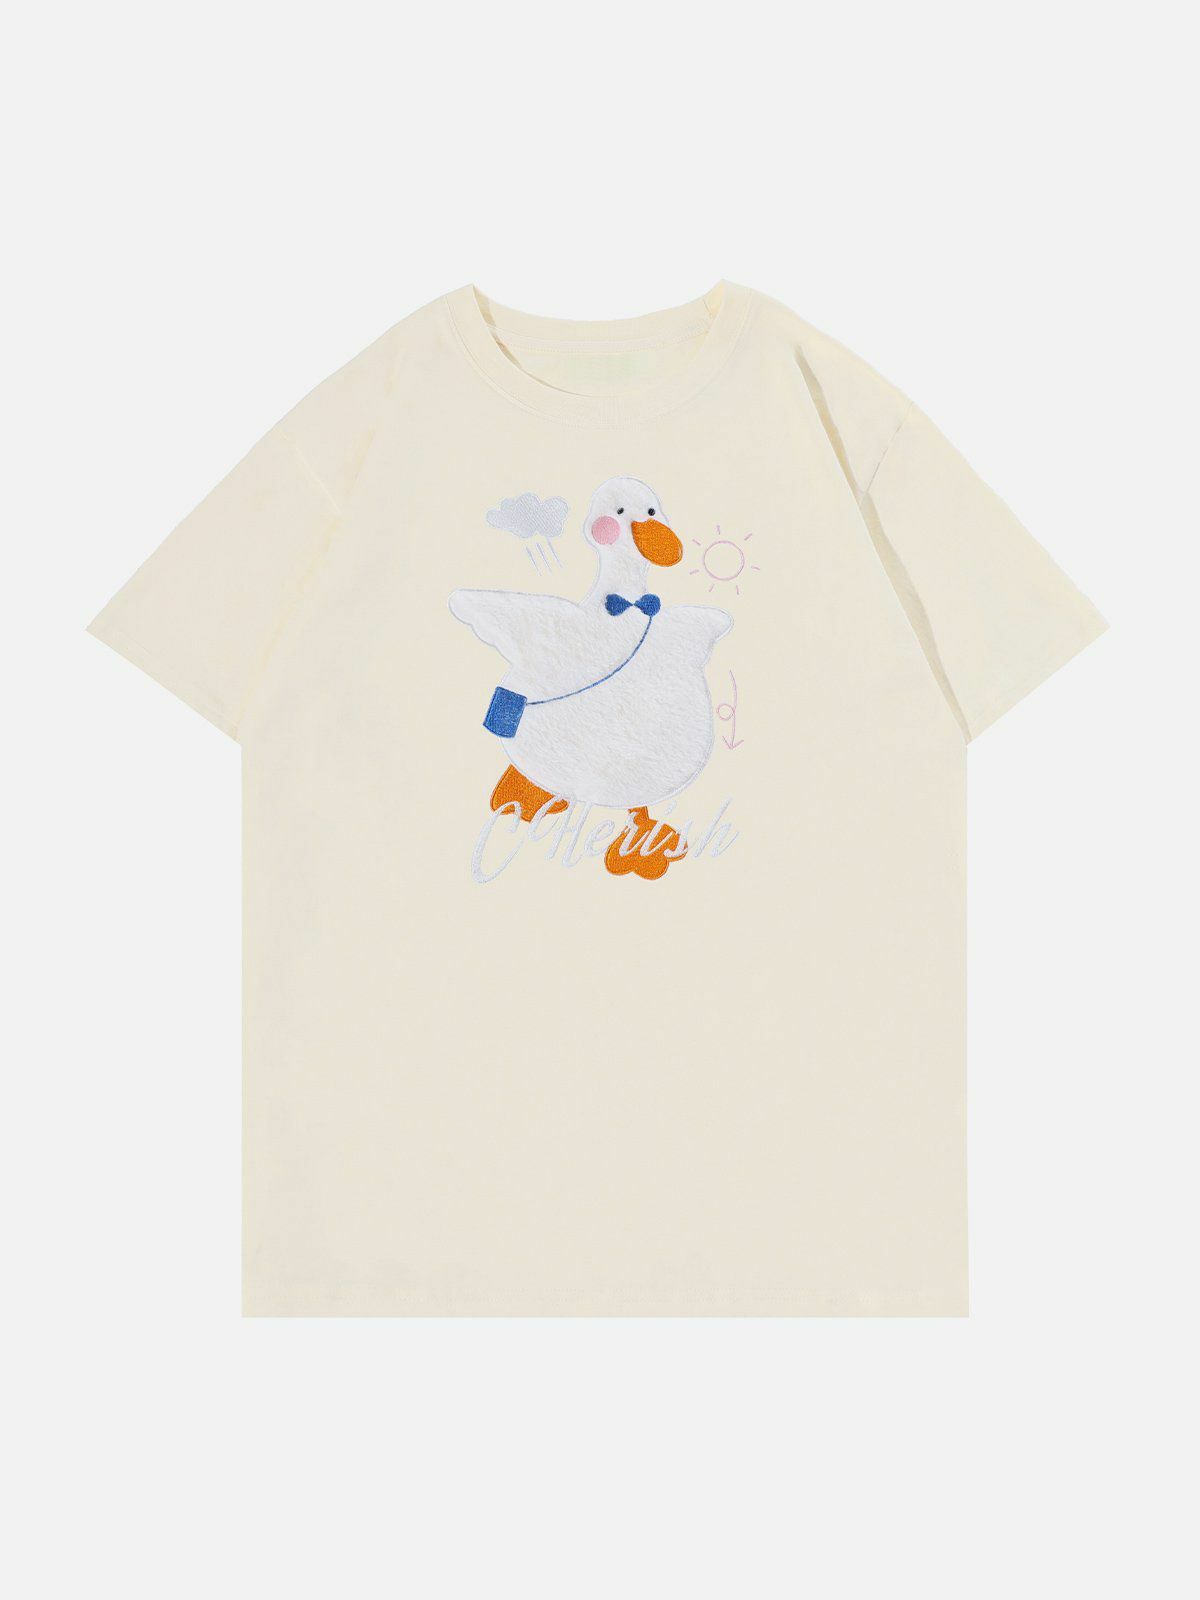 duck patchwork tee quirky streetwear chic 3234